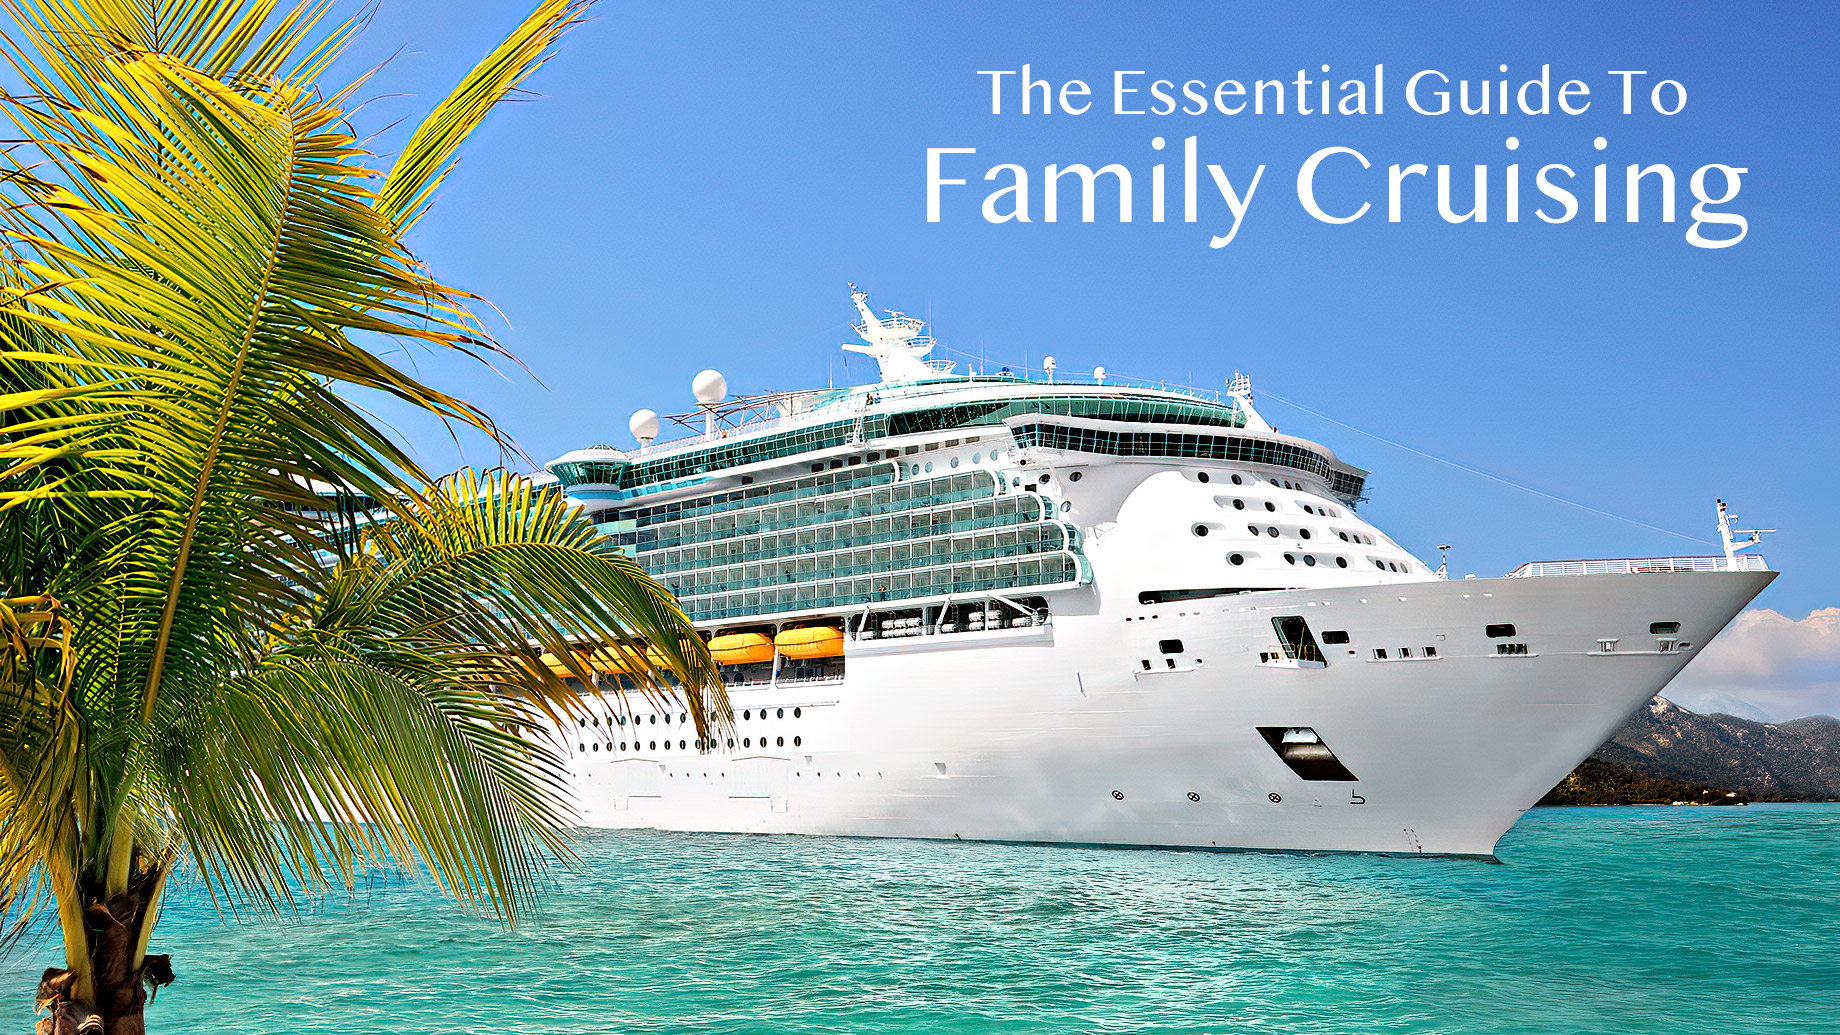 The Essential Guide To Family Cruising